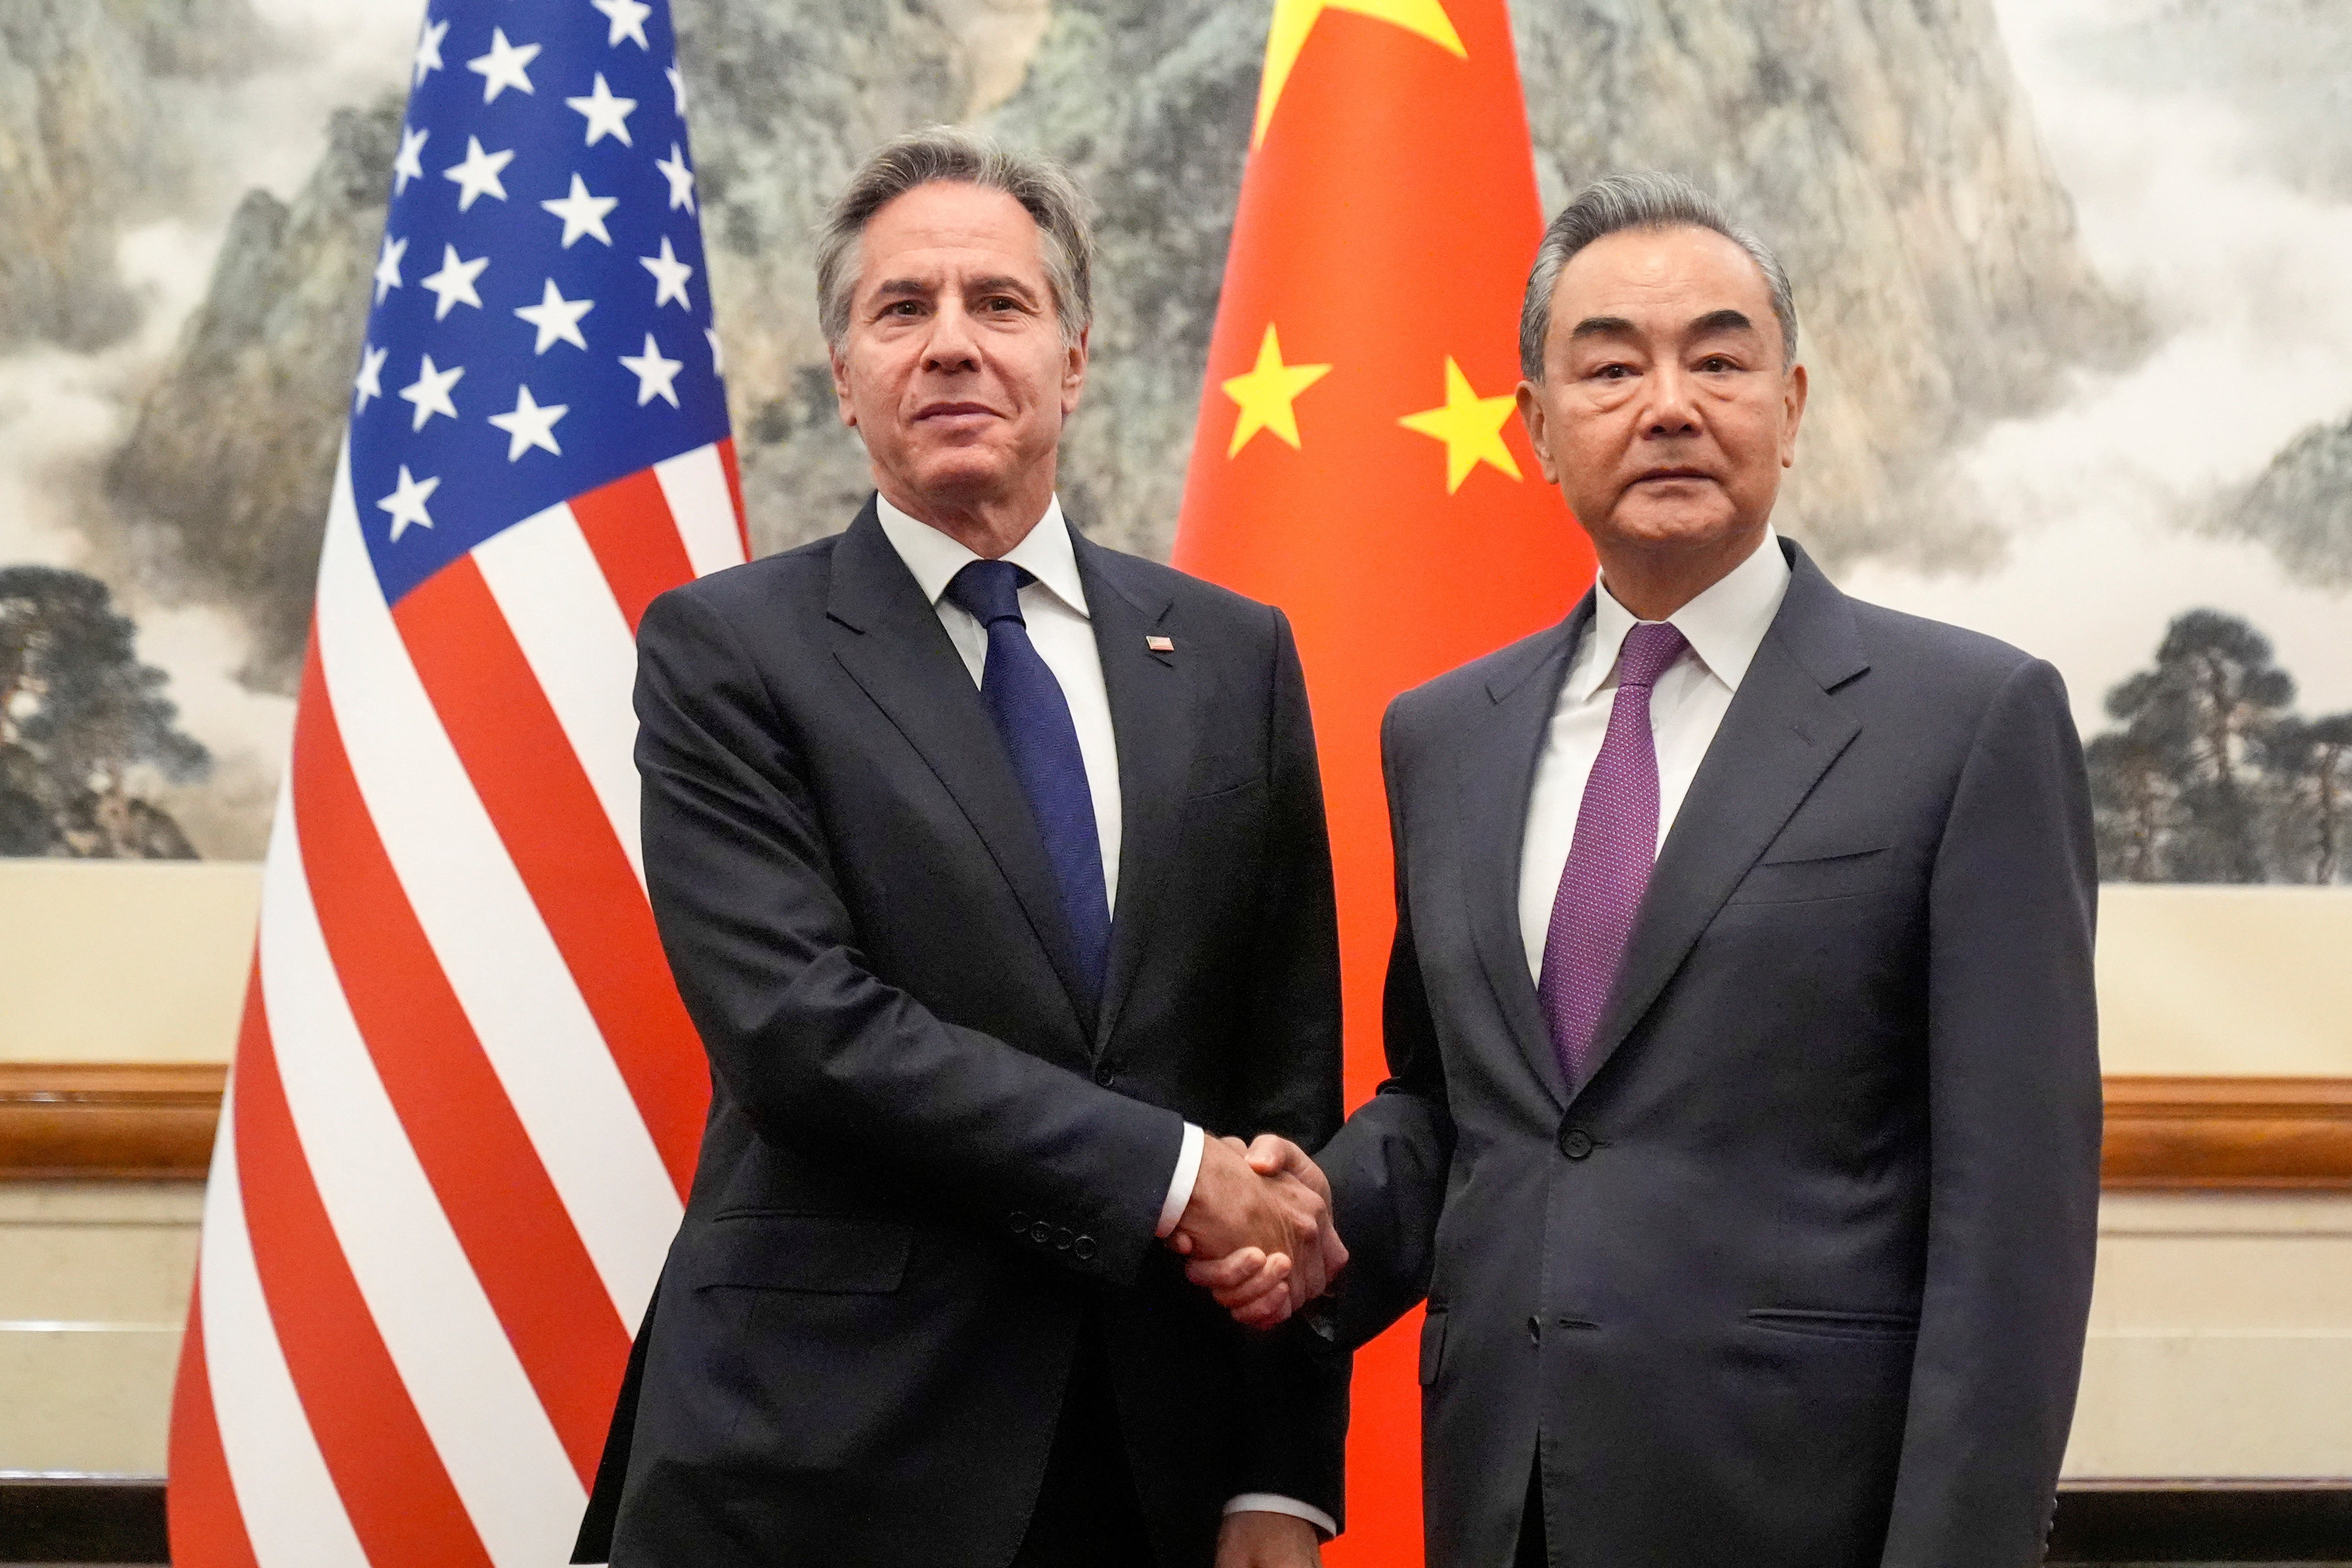 U.S. Secretary of State Antony Blinken, left, meets with China's Foreign Minister Wang Yi at the Diaoyutai State Guesthouse